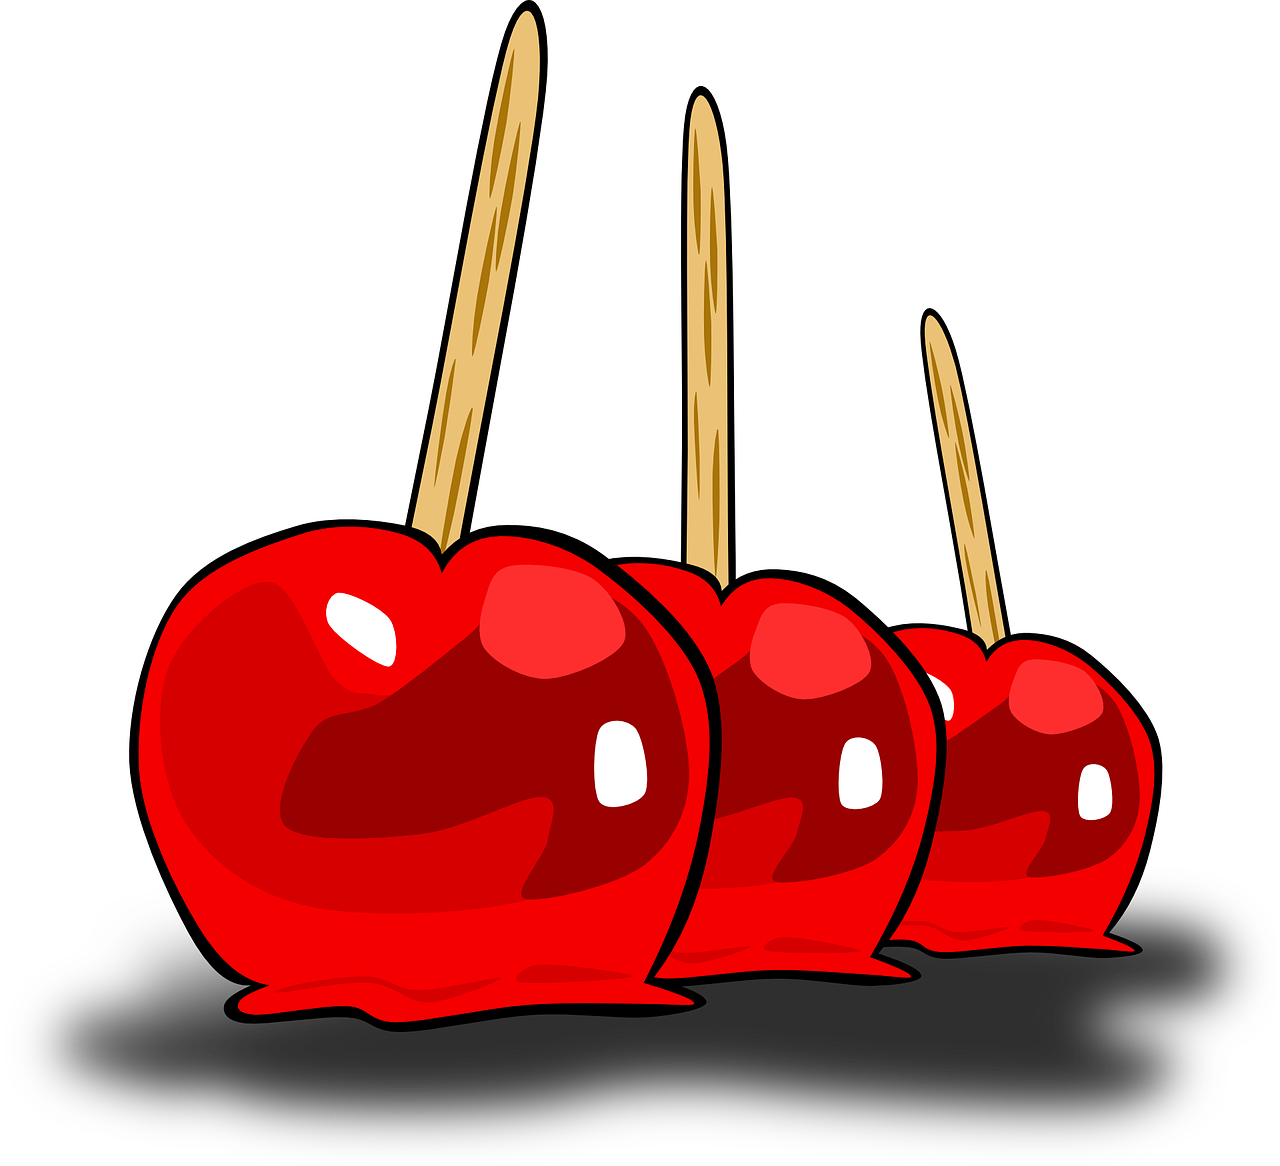 candied apples,canyd apples,caramel apples,apples,apples on a stick,haloween treat,free vector graphics,free pictures, free photos, free images, royalty free, free illustrations, public domain